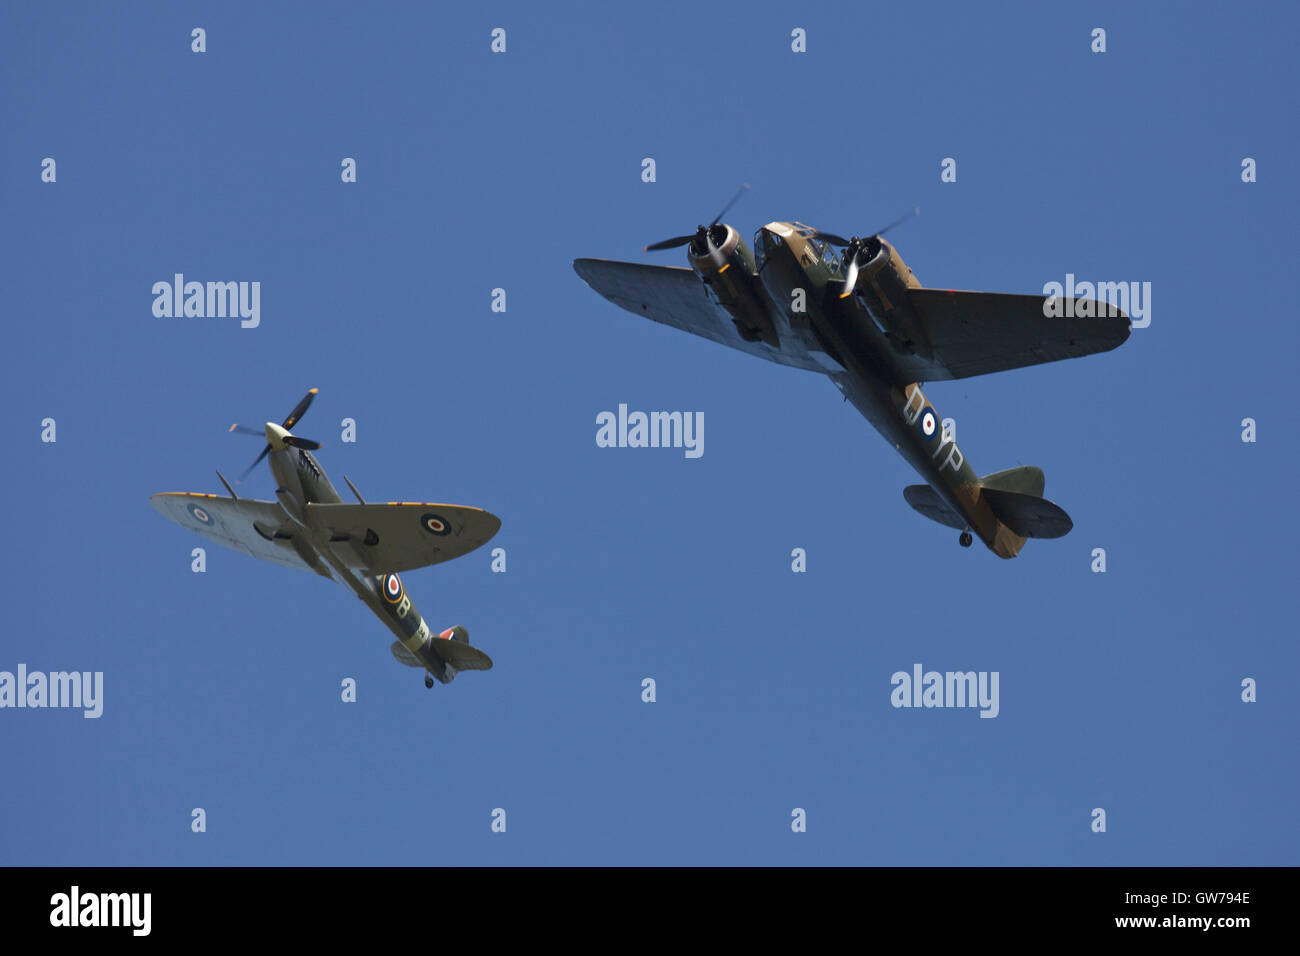 Chichester, UK, UK. 11th Sep, 2016. A Supermarine Spitfire and a Bristol Blenhiem in a display of World War Two aviation during the Goodwood Revival vintage sports car race. © Mark Avery/ZUMA Wire/Alamy Live News Stock Photo